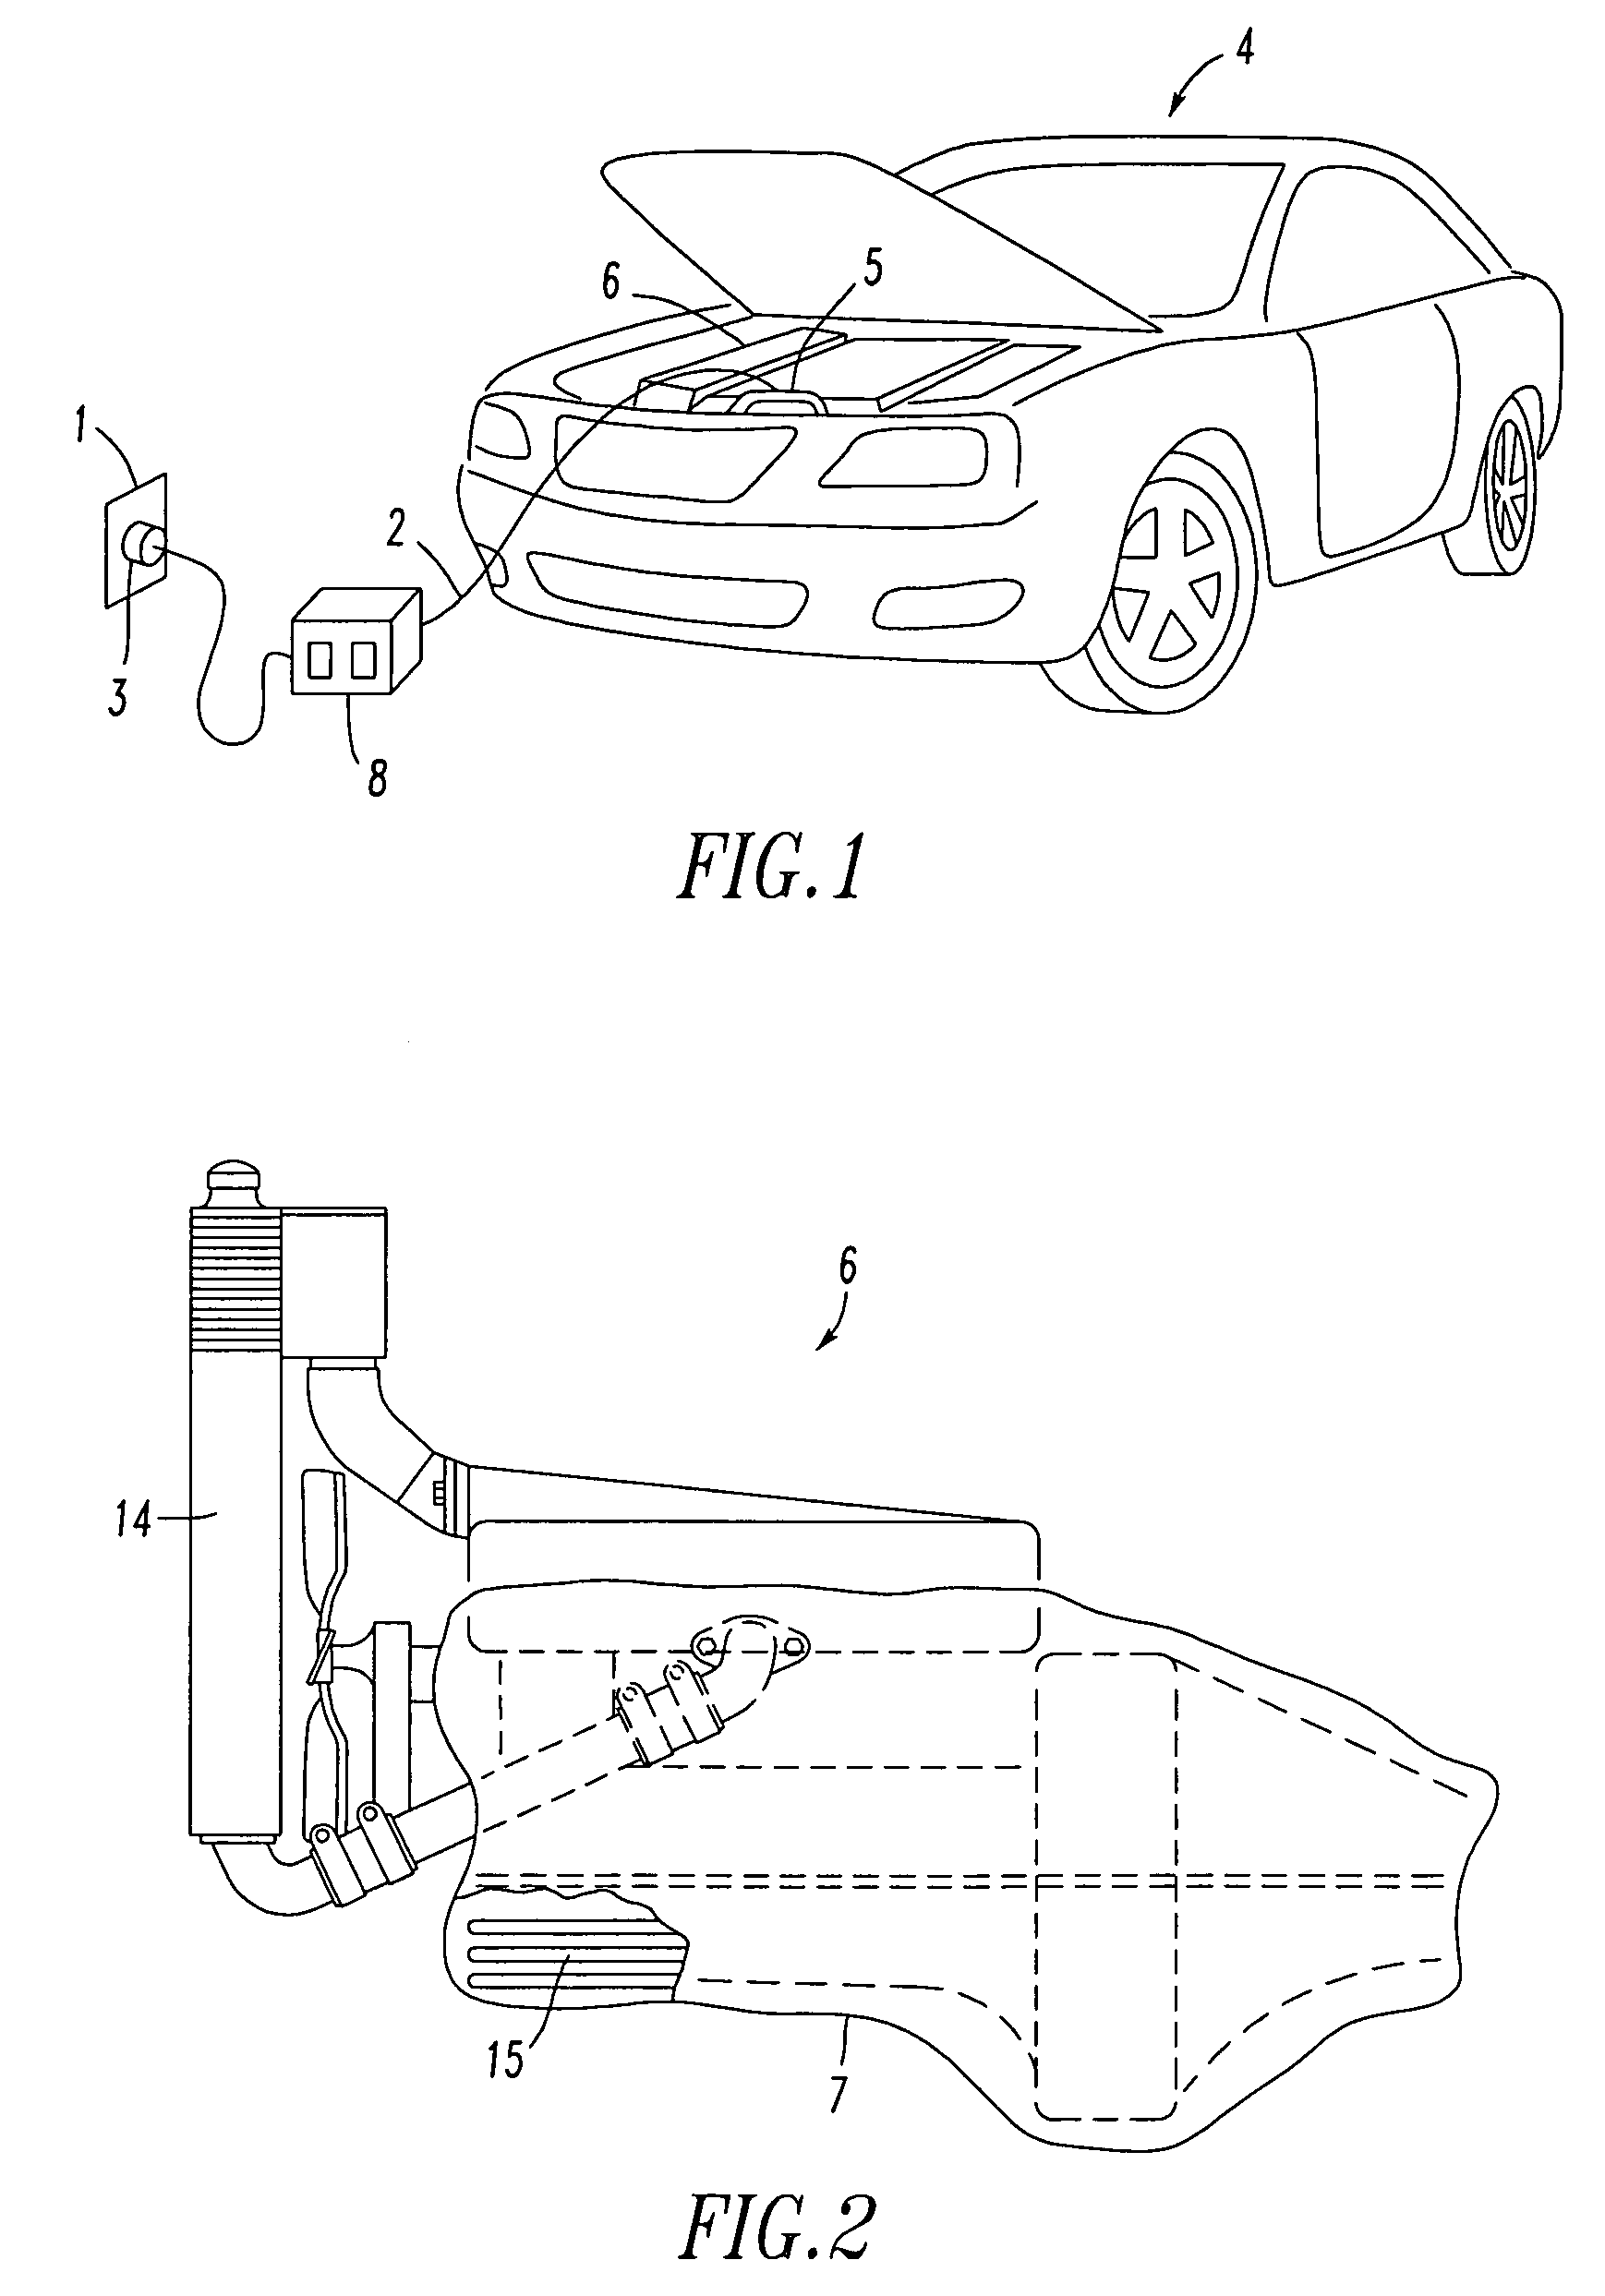 Method of heating and retaining heat in an internal combustion engine to improve fuel economy